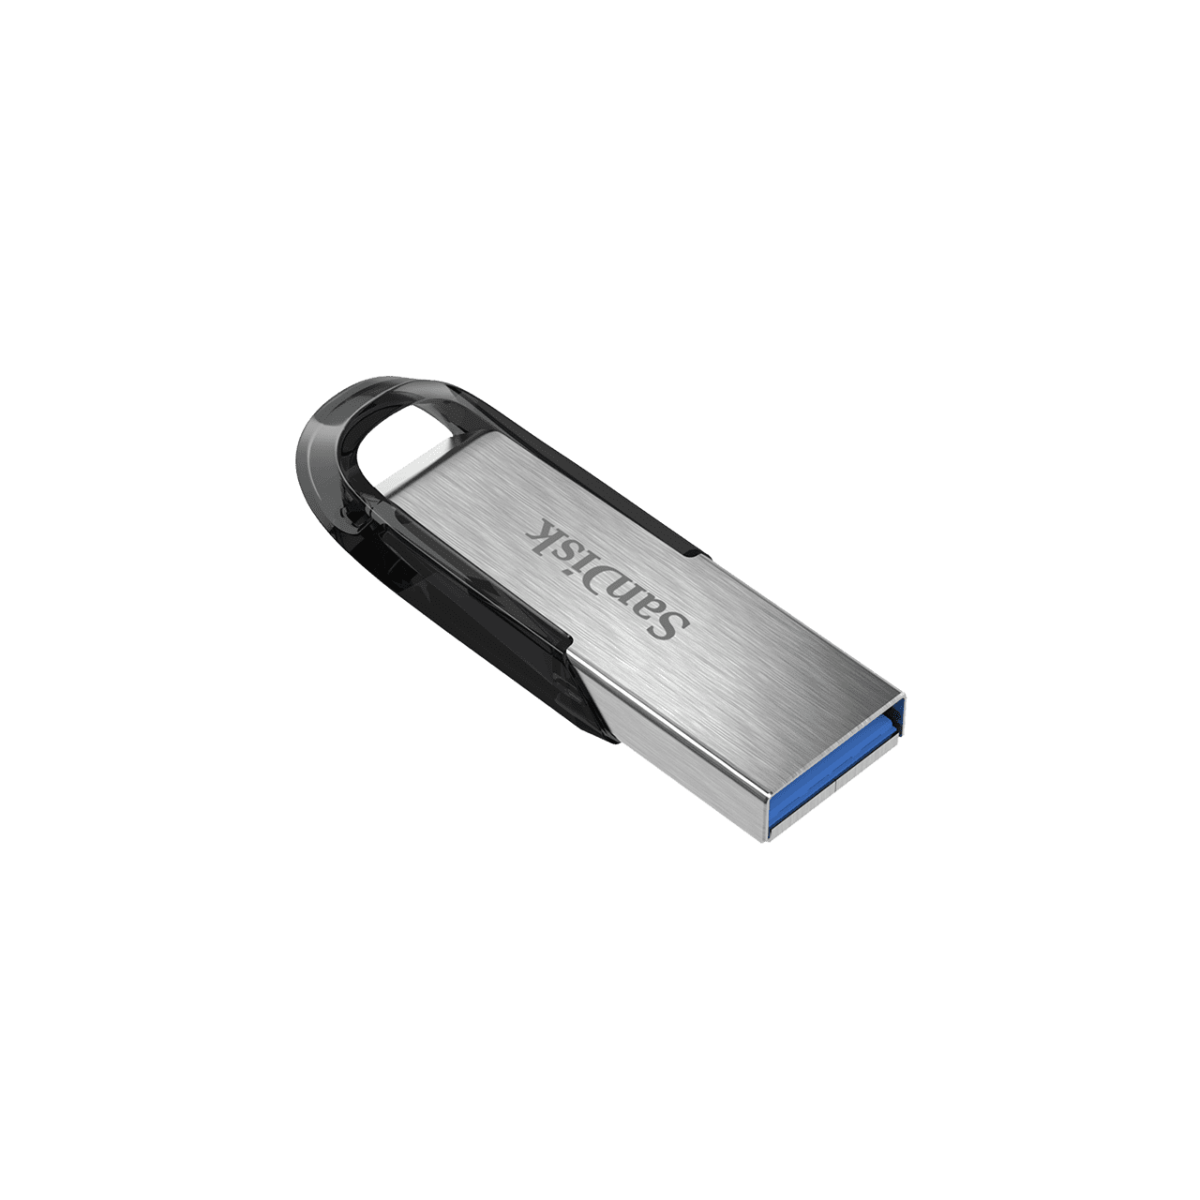 Ultra Flair Usb 3 0 Left.png.thumb .1280.1280 Sandisk &Lt;Div Class=&Quot;Inheritpara Mb-4&Quot;&Gt; The Sandisk Ultra Flair™ Usb 3.0 Flash Drive Moves Your Files Fast. Spend Less Time Waiting To Transfer Files And Enjoy High-Speed Usb 3.0 Performance Of Up To 150Mb/S&Lt;A Class=&Quot;Disclosure&Quot; Tabindex=&Quot;0&Quot; Href=&Quot;Https://Shop.westerndigital.com/Products/Usb-Flash-Drives/Sandisk-Ultra-Flair-Usb-3-0#Disclosures&Quot; Target=&Quot;_Self&Quot; Rel=&Quot;Noopener Noreferrer&Quot; Aria-Labelledby=&Quot;Disclosures&Quot;&Gt;&Lt;Sup&Gt;**&Lt;/Sup&Gt;&Lt;/A&Gt;. Its Durable And Sleek Metal Casing Is Tough Enough To Handle Knocks With Style. And, With Password Protection, You Can Rest Assured That Your Private Files Stay Private&Lt;A Class=&Quot;Disclosure&Quot; Tabindex=&Quot;0&Quot; Href=&Quot;Https://Shop.westerndigital.com/Products/Usb-Flash-Drives/Sandisk-Ultra-Flair-Usb-3-0#Disclosures&Quot; Target=&Quot;_Self&Quot; Rel=&Quot;Noopener Noreferrer&Quot; Aria-Labelledby=&Quot;Disclosures&Quot;&Gt;&Lt;Sup&Gt;1&Lt;/Sup&Gt;&Lt;/A&Gt;. Store Your Files In Style With The Sandisk Ultra Flair Usb 3.0 Flash Drive. &Lt;Strong&Gt;Warranty&Lt;/Strong&Gt; The Sandisk Ultra Flair Usb 3.0 Flash Drive Is Backed By A Five-Year Manufacturer Warranty&Lt;A Class=&Quot;Disclosure&Quot; Tabindex=&Quot;0&Quot; Href=&Quot;Https://Shop.westerndigital.com/Products/Usb-Flash-Drives/Sandisk-Ultra-Flair-Usb-3-0#Disclosures&Quot; Target=&Quot;_Self&Quot; Rel=&Quot;Noopener Noreferrer&Quot; Aria-Labelledby=&Quot;Disclosures&Quot;&Gt;&Lt;Sup&Gt;2&Lt;/Sup&Gt;&Lt;/A&Gt; &Lt;/Div&Gt; Sandisk Ultra Flair Usb 3.0 Flash Drive (64Gb)